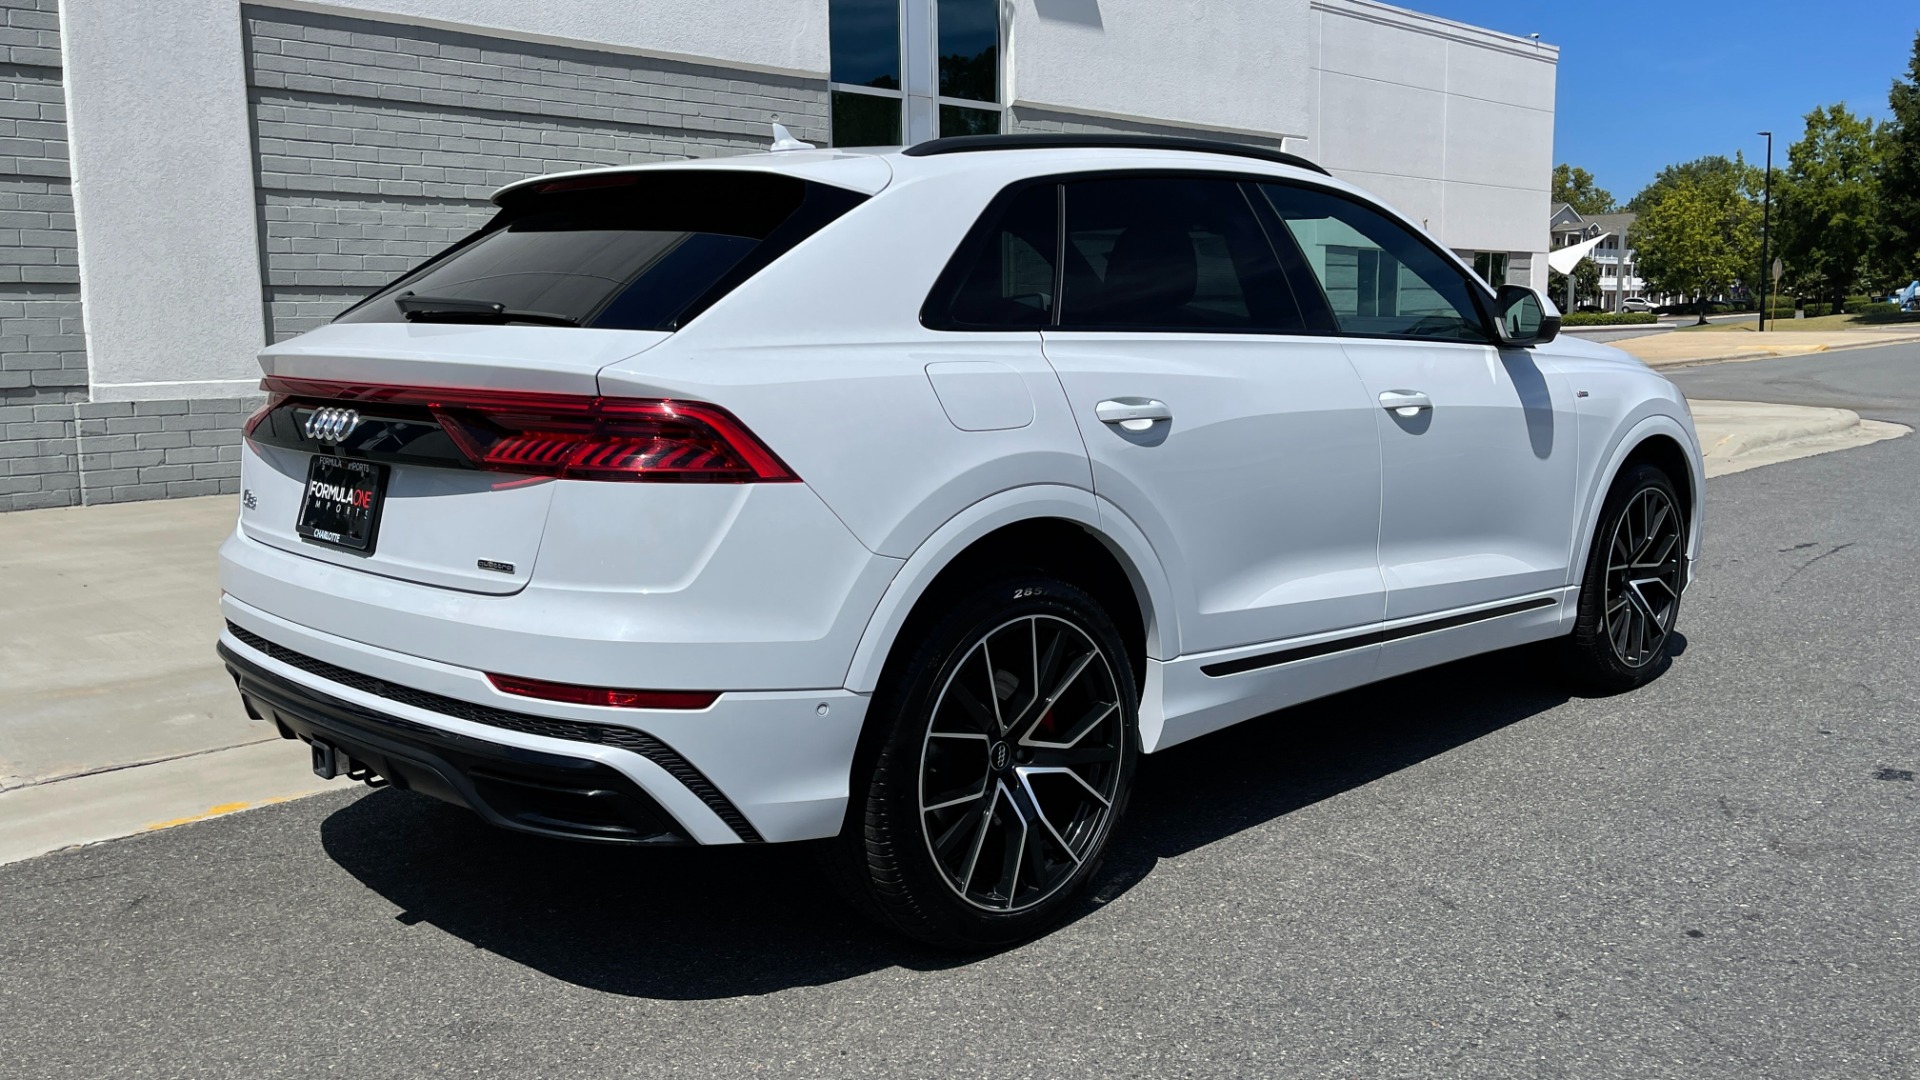 Used 2020 Audi Q8 PREMIUM PLUS / NAV / S-LINE / TOWING / BLACK OPTIC / B&O SND / REARVIEW for sale $63,995 at Formula Imports in Charlotte NC 28227 7